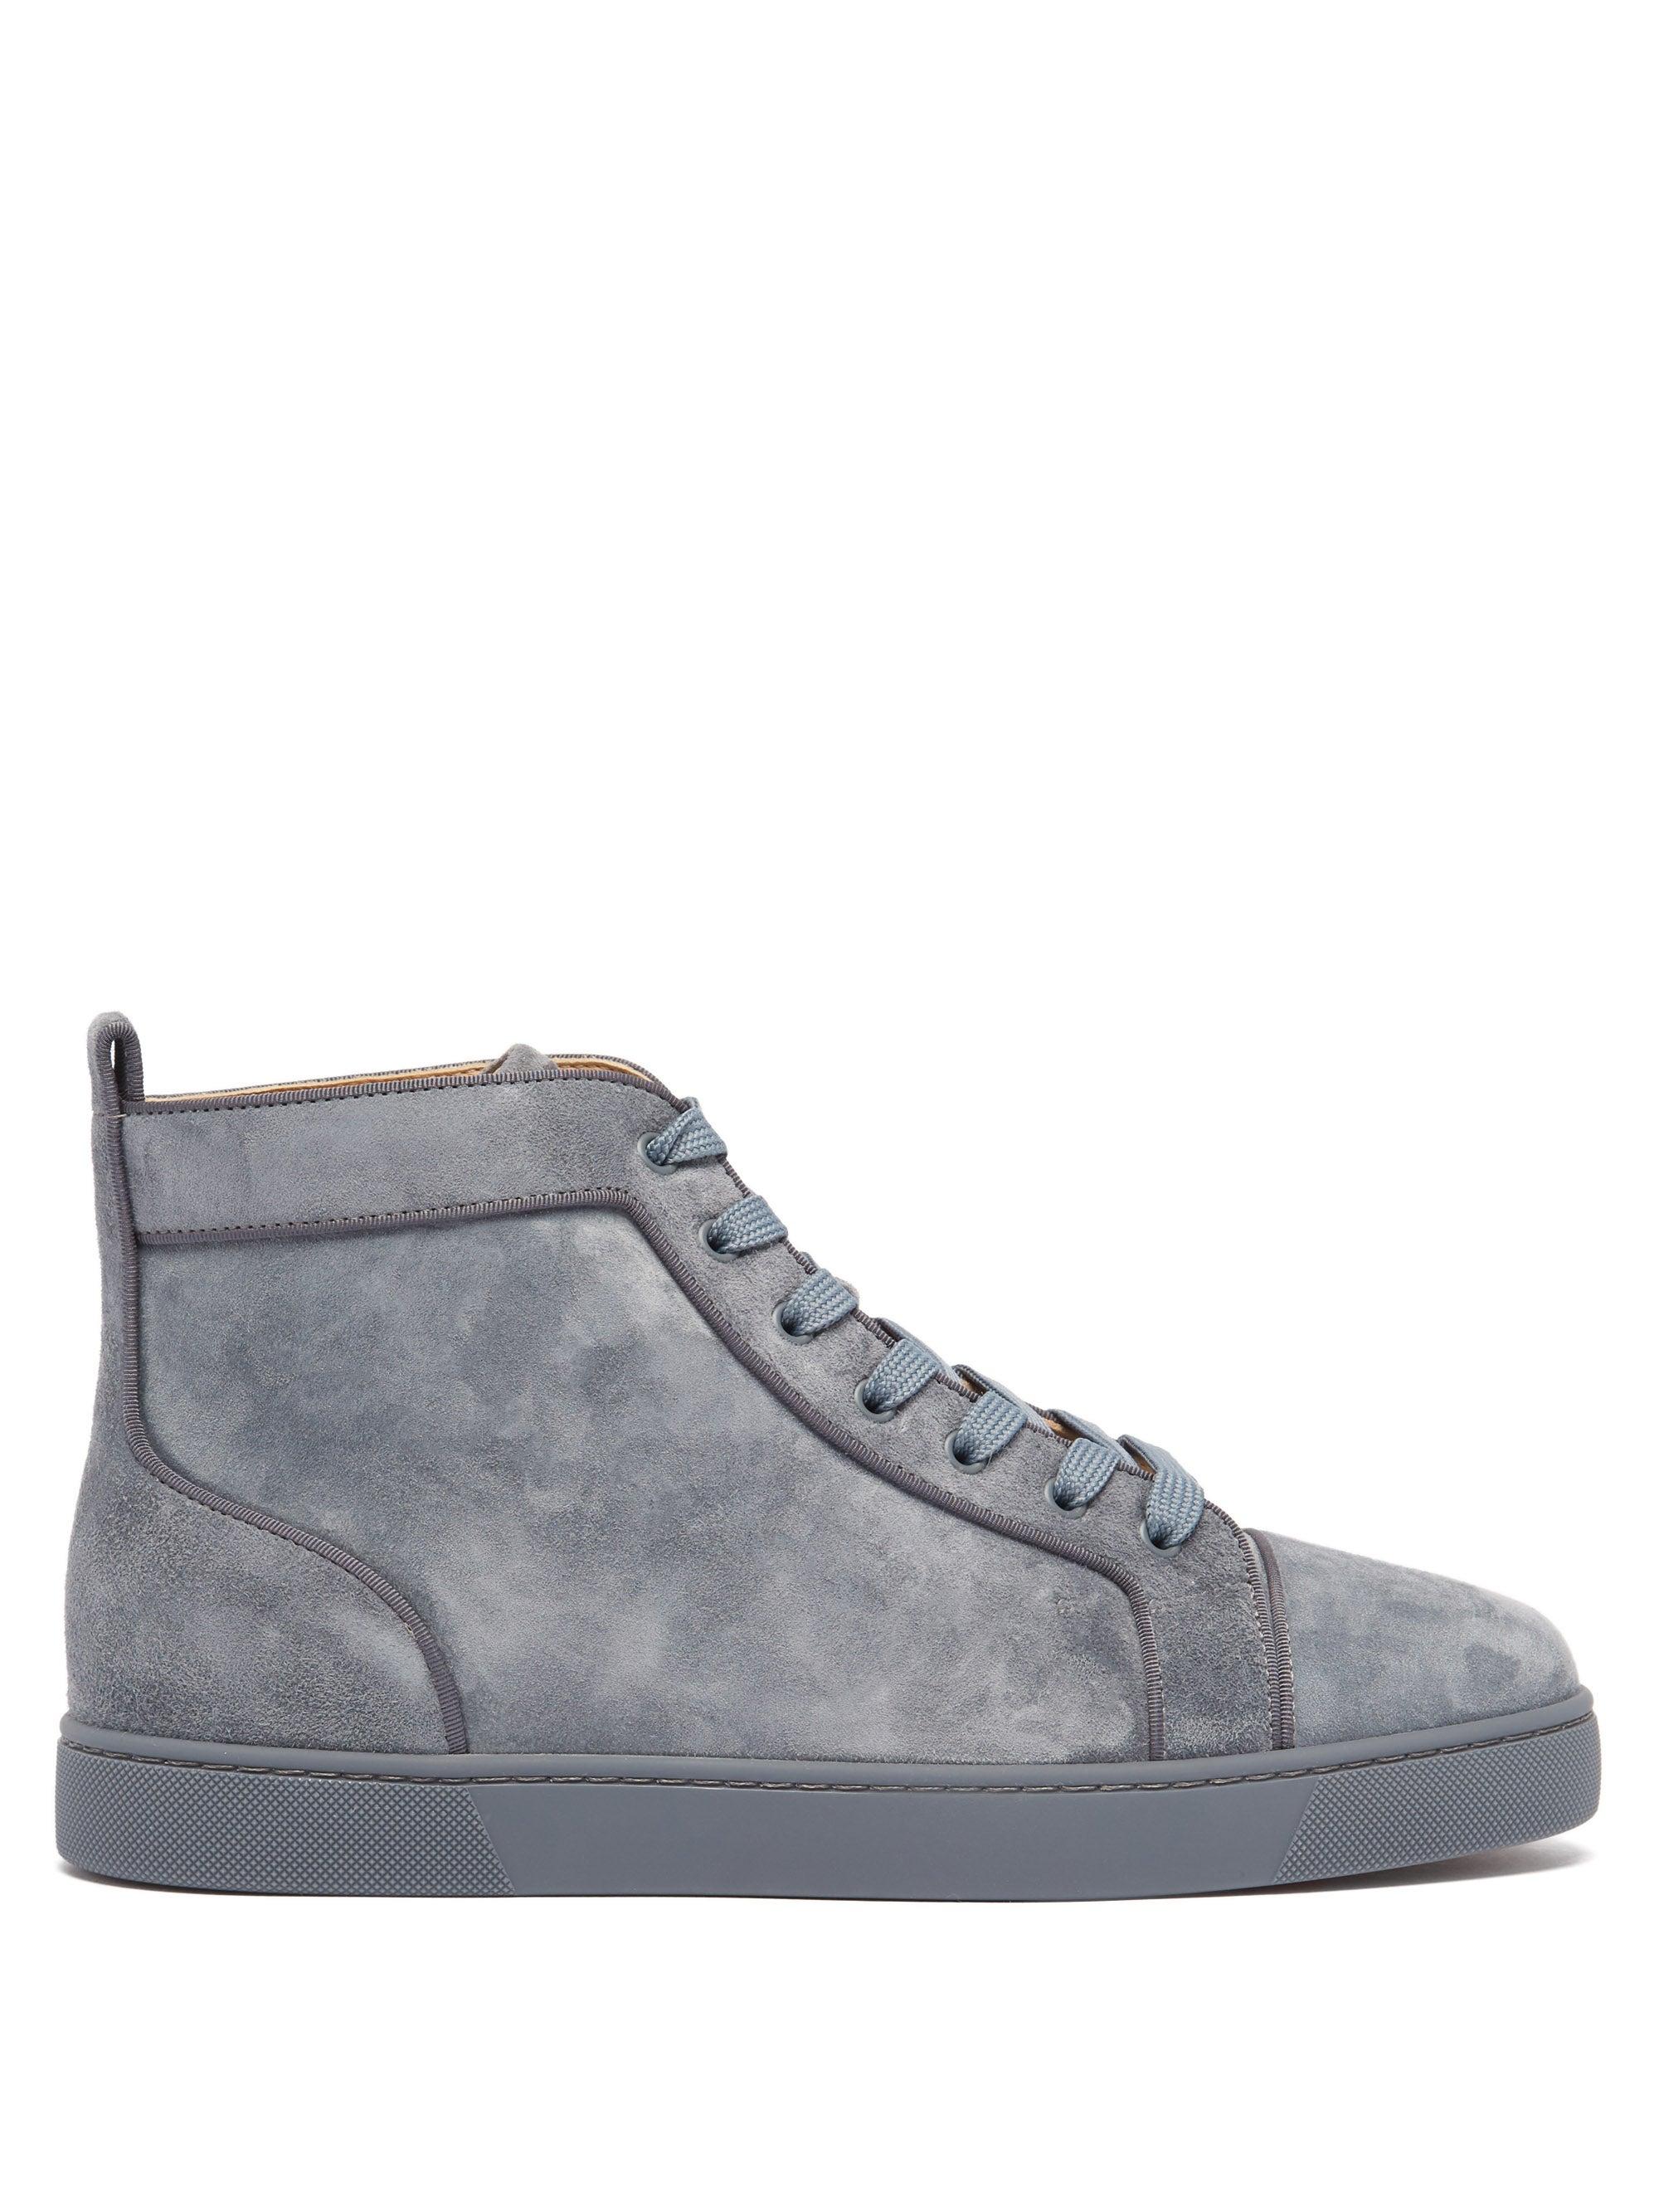 Christian Louboutin Louis Orlato Suede High-top Trainers in Gray for Men |  Lyst